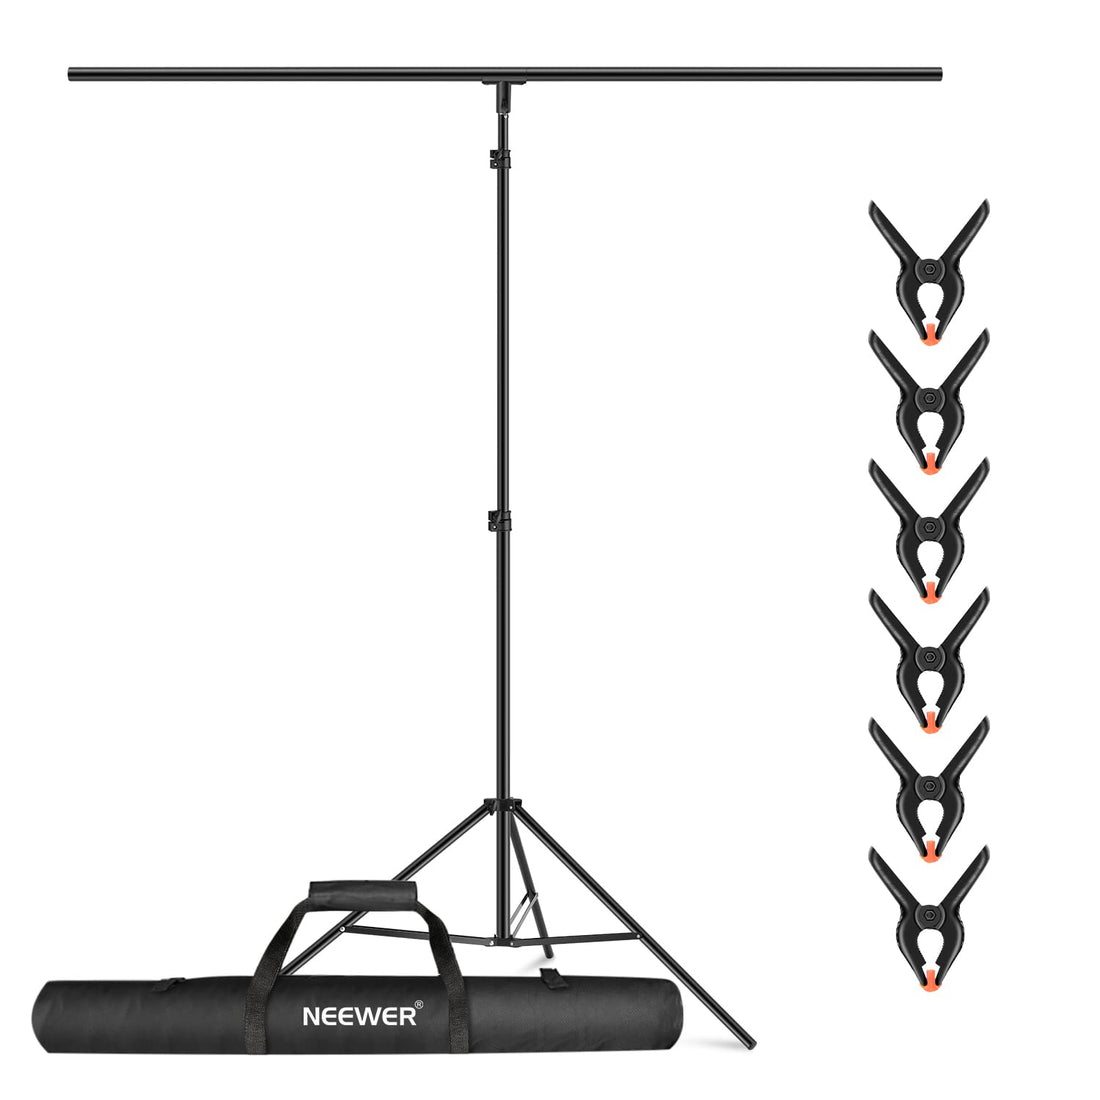 NEEWER T-Shaped Background Backdrop Support Stand Kit, 8.5ft/2.6m Tall Adjustable Tripod Stand and 5ft/1.5m Wide Crossbars with 6 Spring Clamps and 1 Carrying Bag for Studio Photo Video Photography